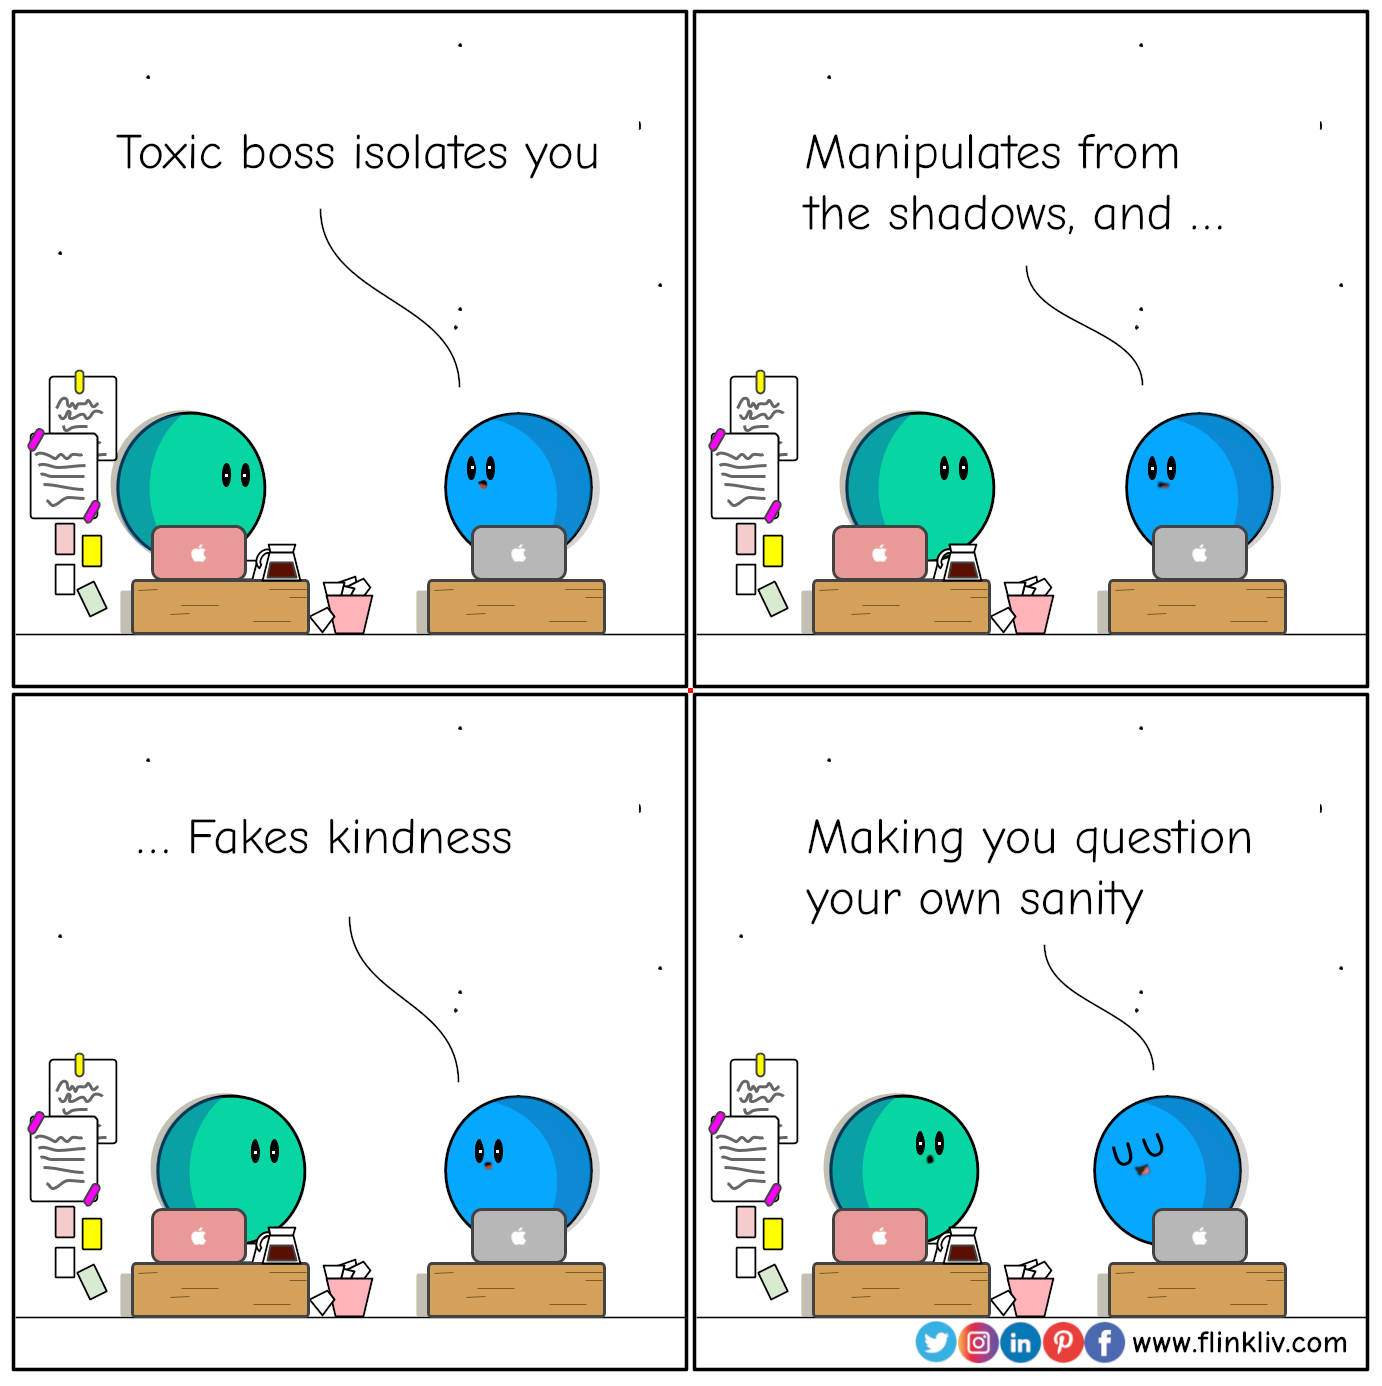 Conversation between A and B about toxic bosses' subtile techniques.
				B: Toxic boss isolates you, manipulates from the shadows, and fakes kindness, making you question your own sanity.
				By Flinkliv.com
            